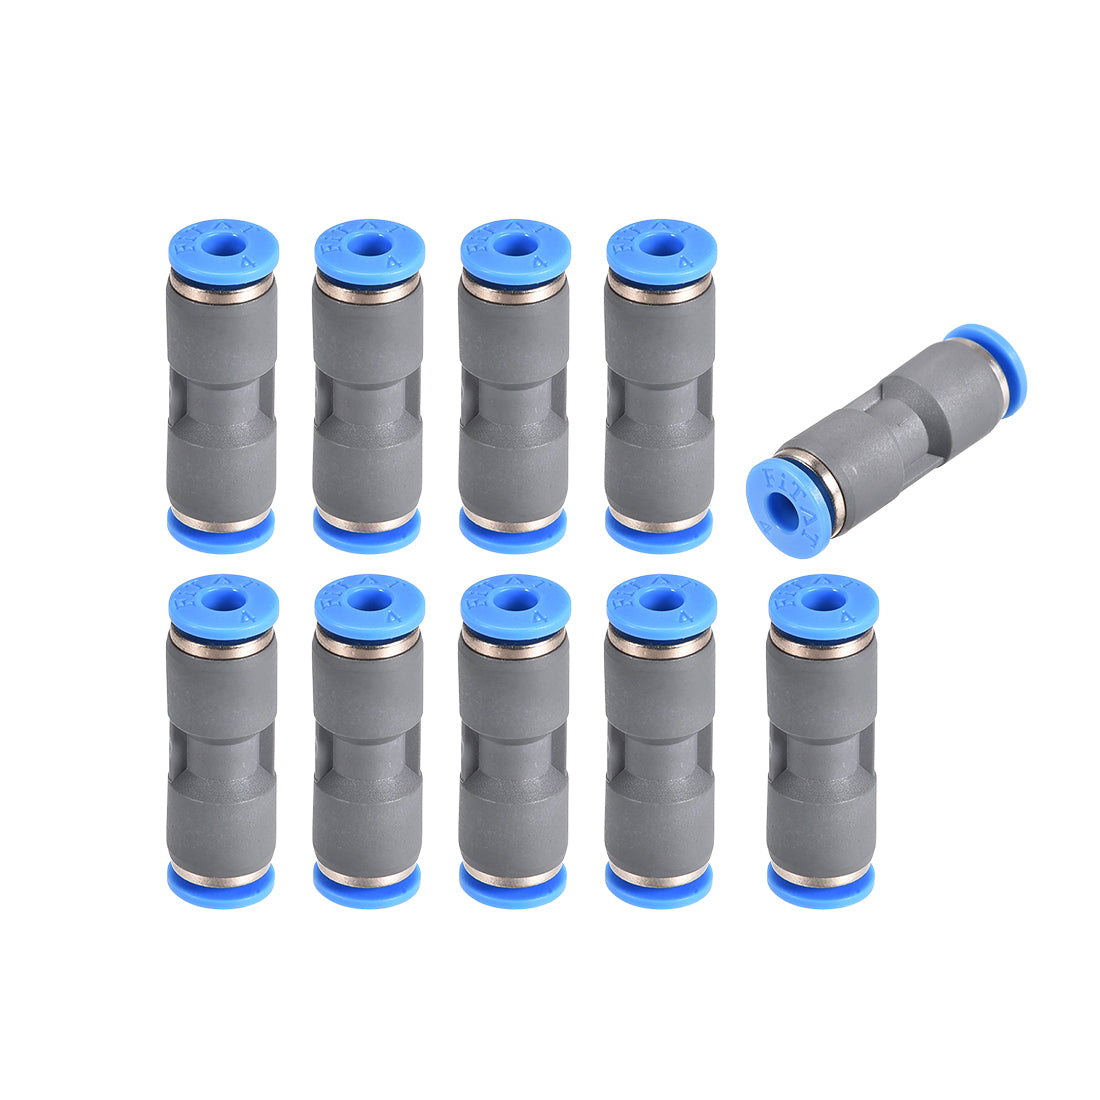 uxcell Uxcell Straight Push Connectors 4mm Quick Release Pneumatic Connector Plastic Union Pipe Tube Fitting Grey 10Pcs